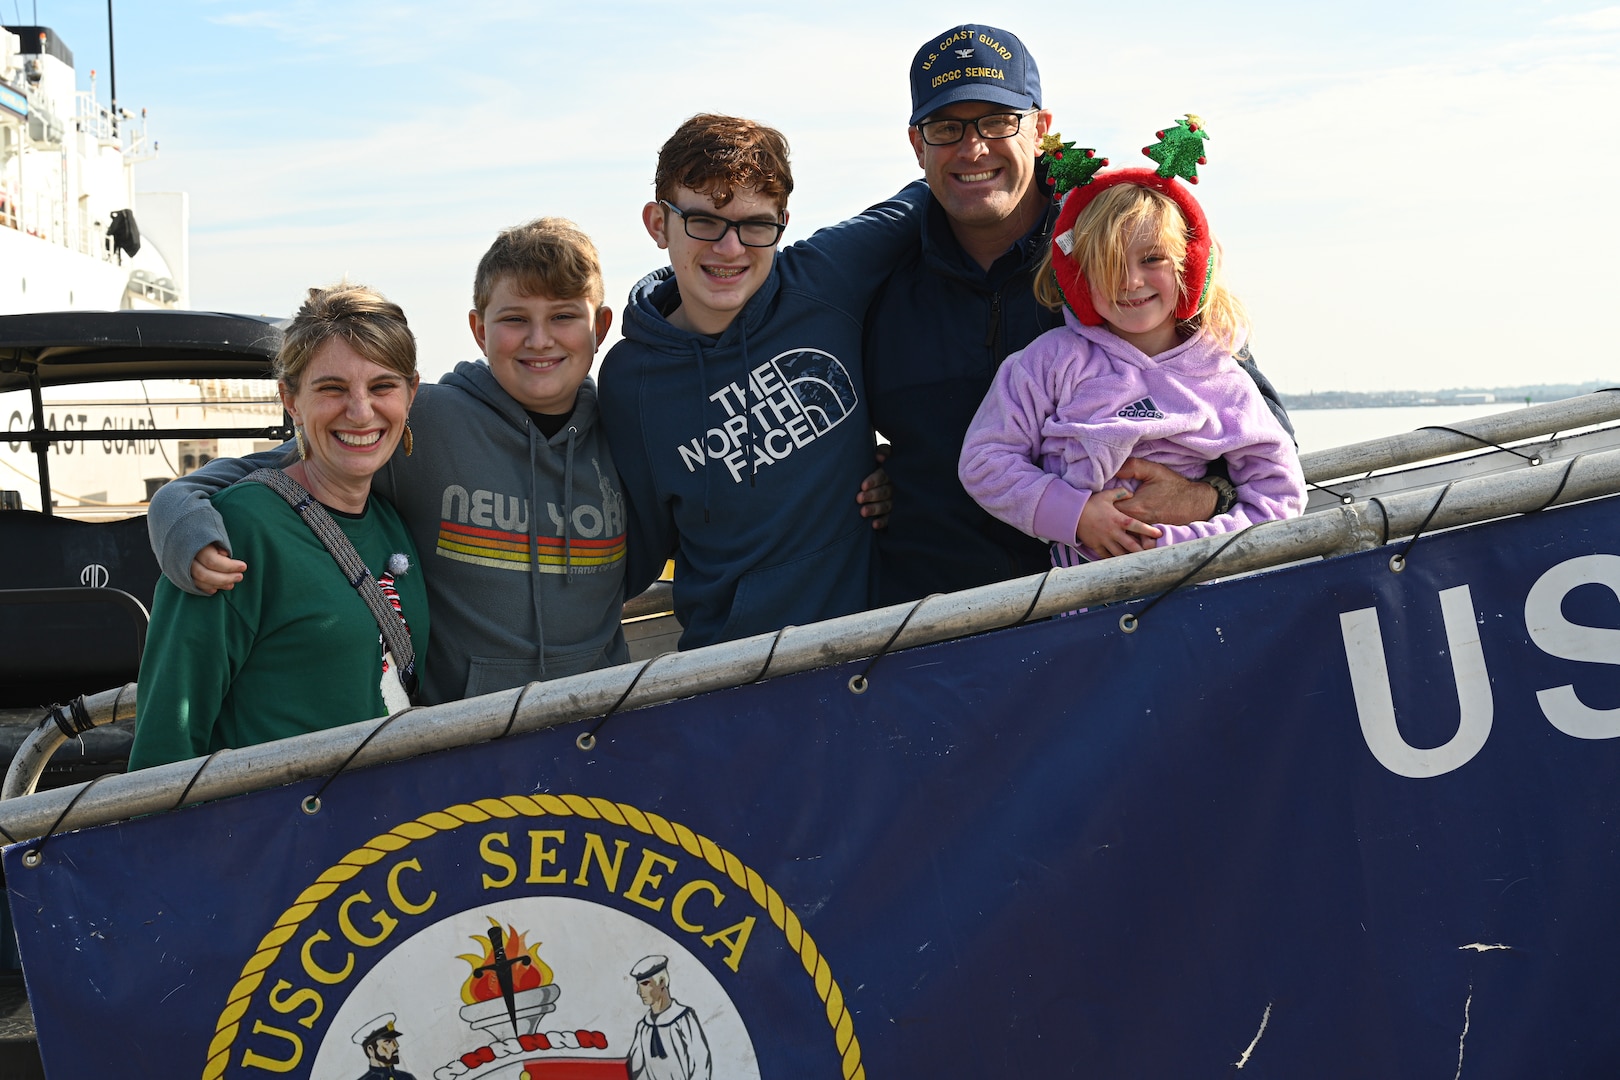 U.S. Coast Guard Capt. James McCormack, the commanding officer of U.S. Coast Guard Cutter Seneca (WMEC 906), poses for a photo with his family at the cutter's return to homeport in Portsmouth, Virginia, Dec. 22, 2023, following a 65-day patrol in the Western Caribbean and Eastern Pacific Ocean. Patrolling in support of Joint Interagency Task Force-South, Seneca worked alongside other Coast Guard cutters, Department of Defense and Department of Homeland Security units, and international partners to conduct maritime safety and security missions.